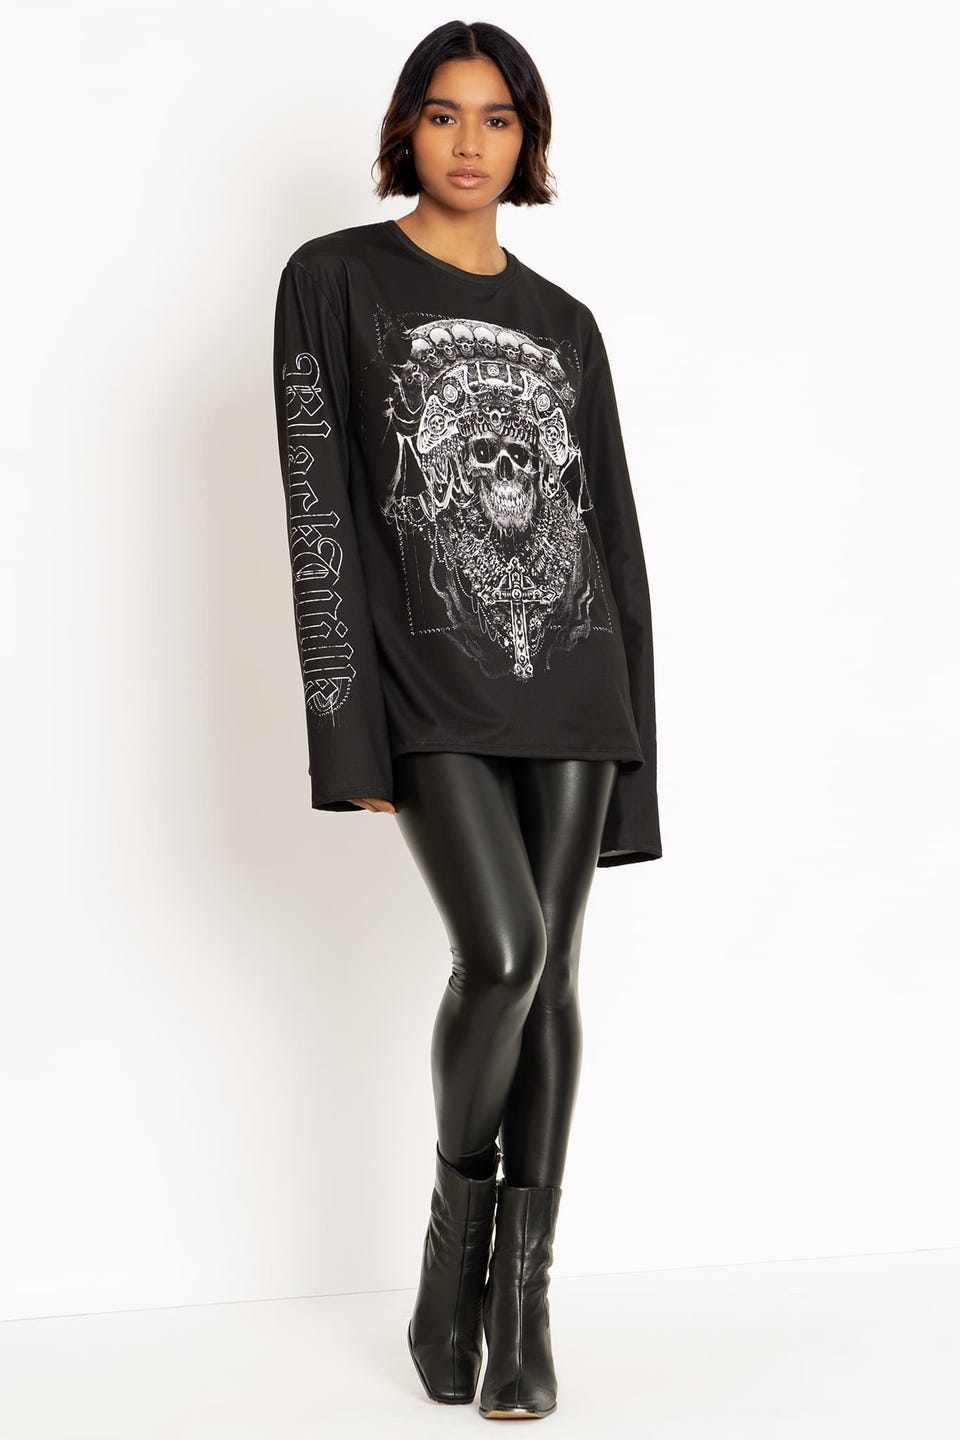 Hexe Long Sleeve Oversized BFT - Limited